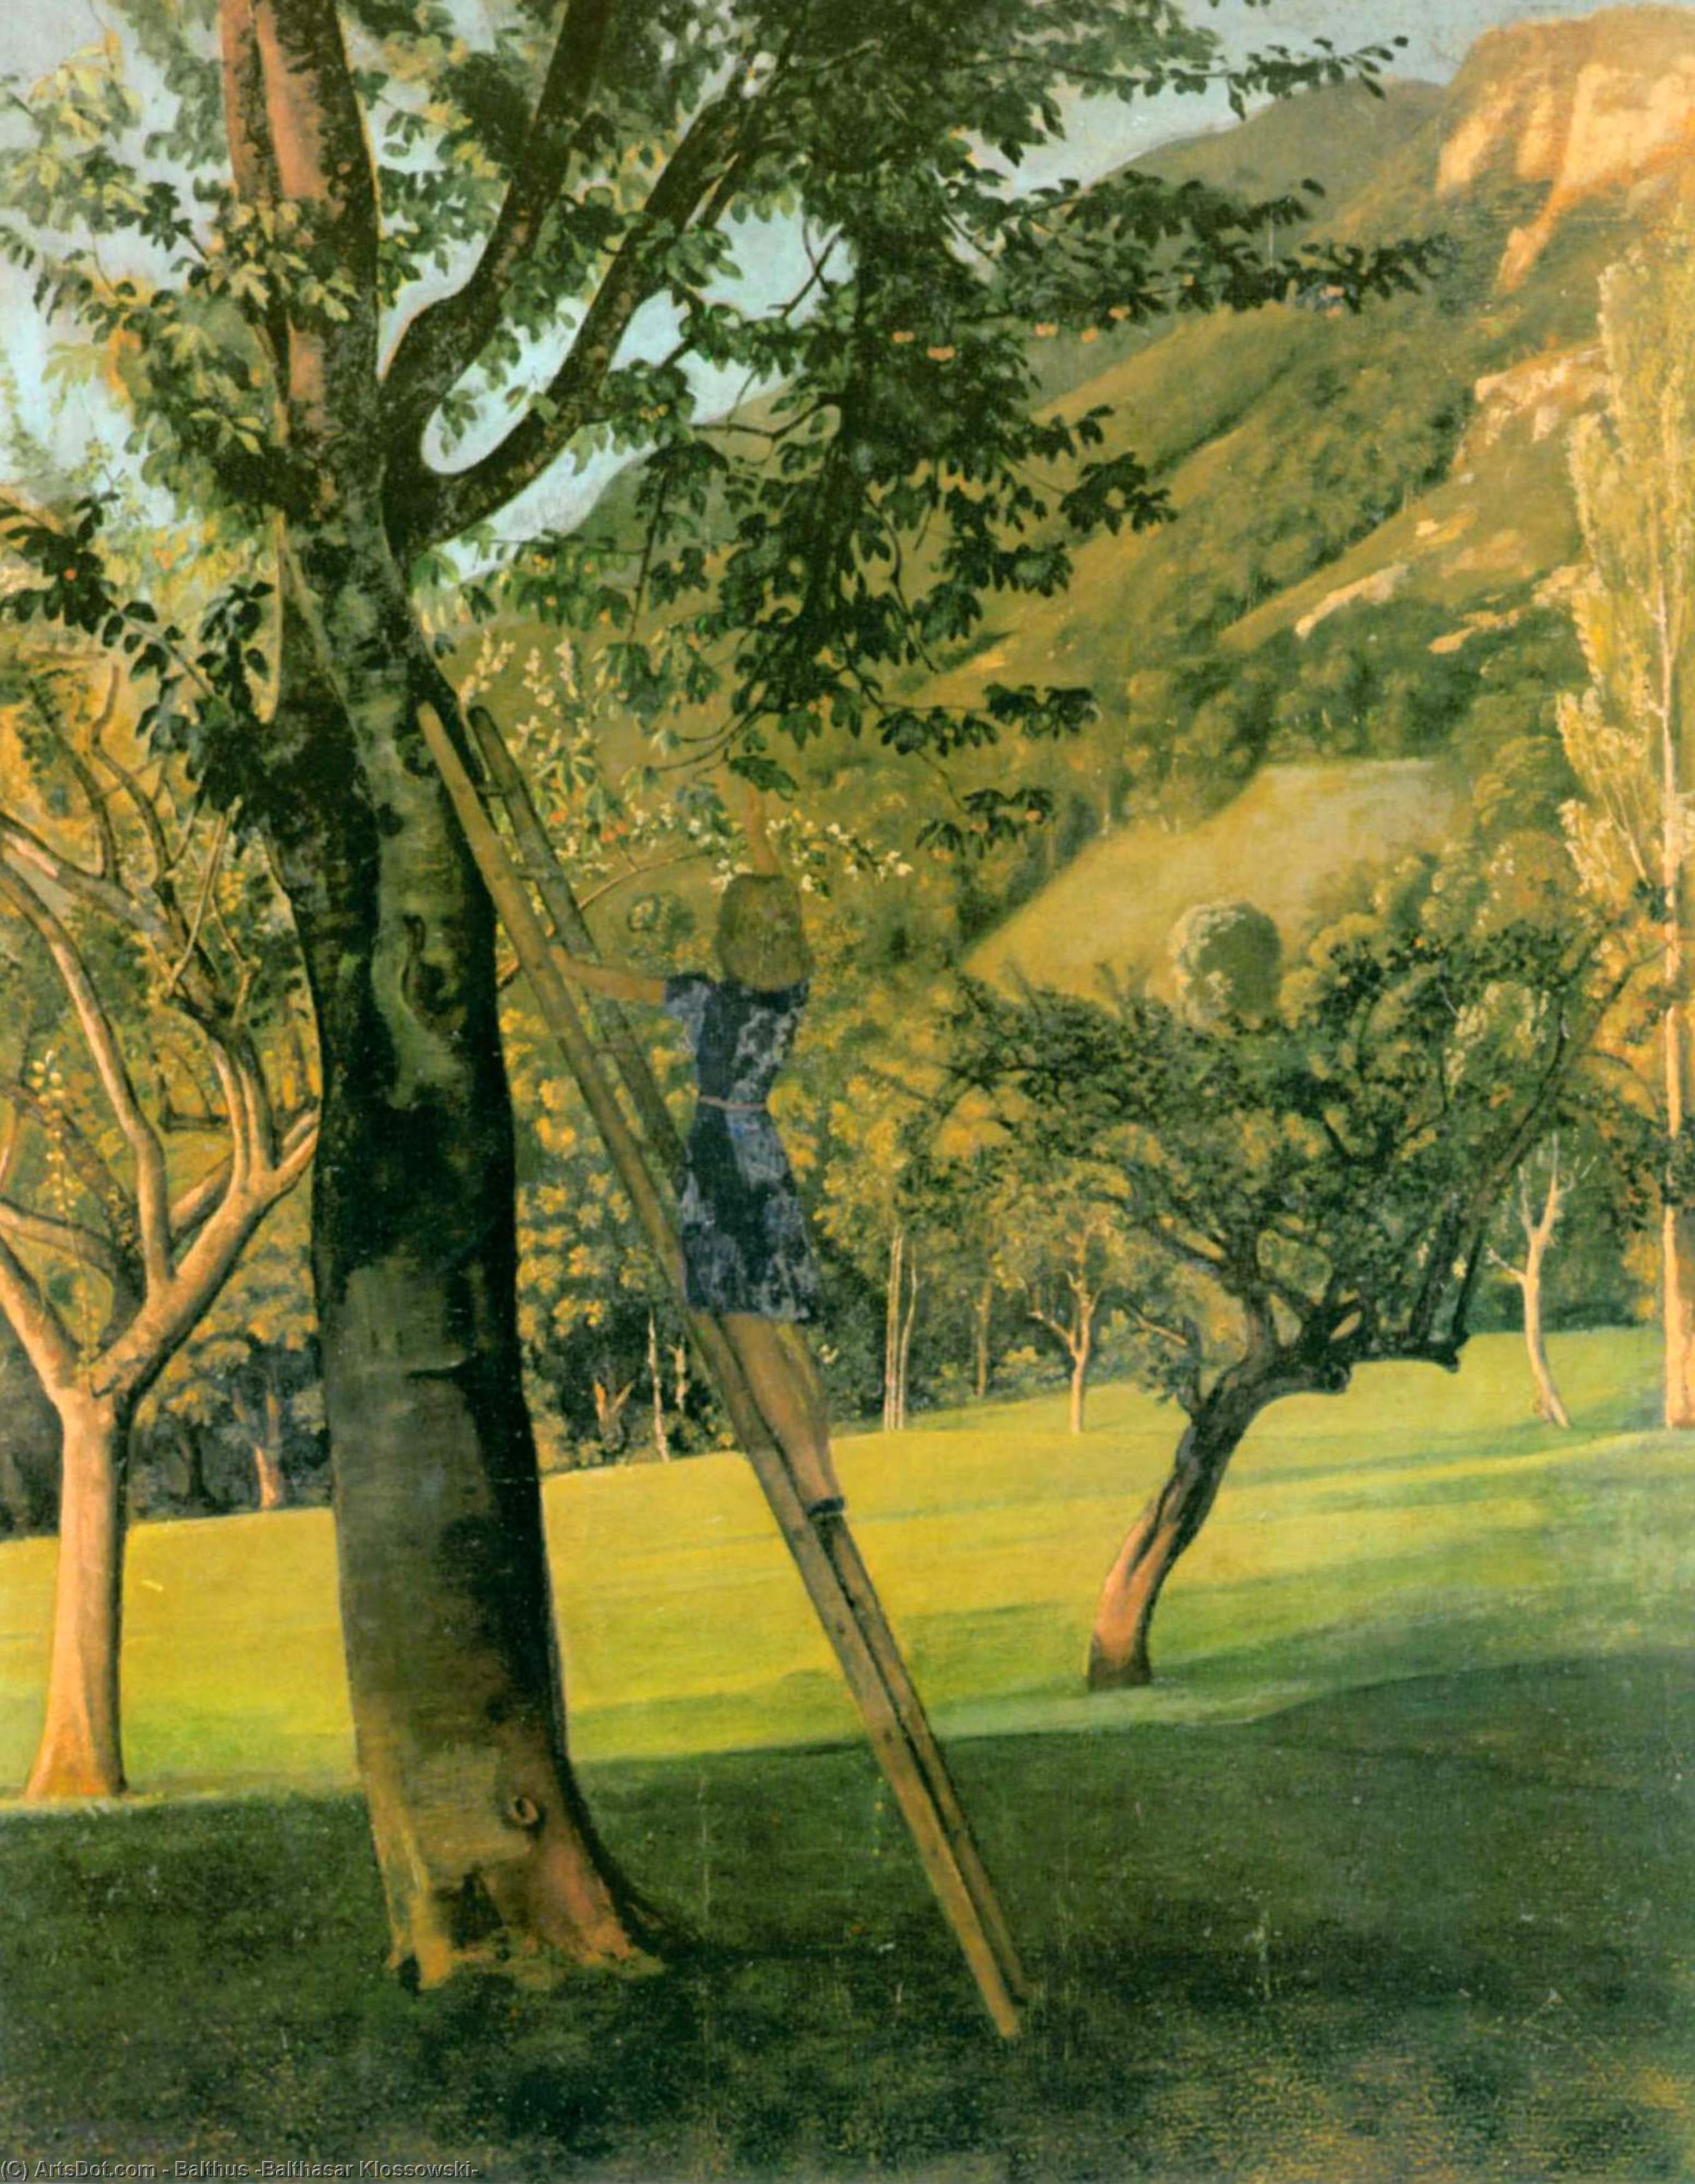 The Cherry Tree, 1940 by Balthus (Balthasar Klossowski) (1908-2001, France) Balthus (Balthasar Klossowski) | ArtsDot.com